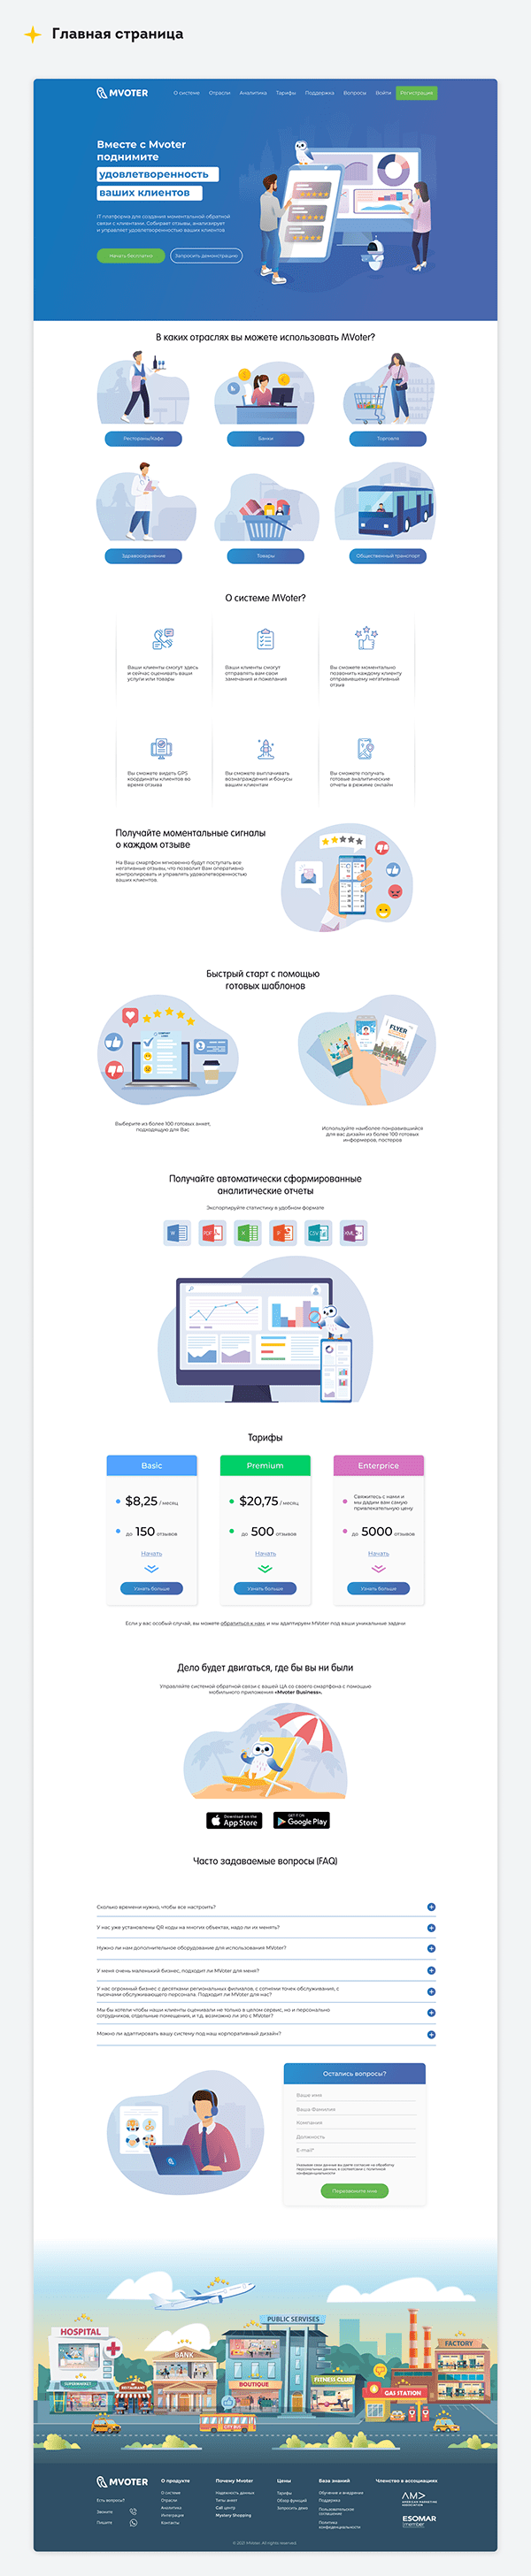 Redesign of a multi-page site for an IT platform.